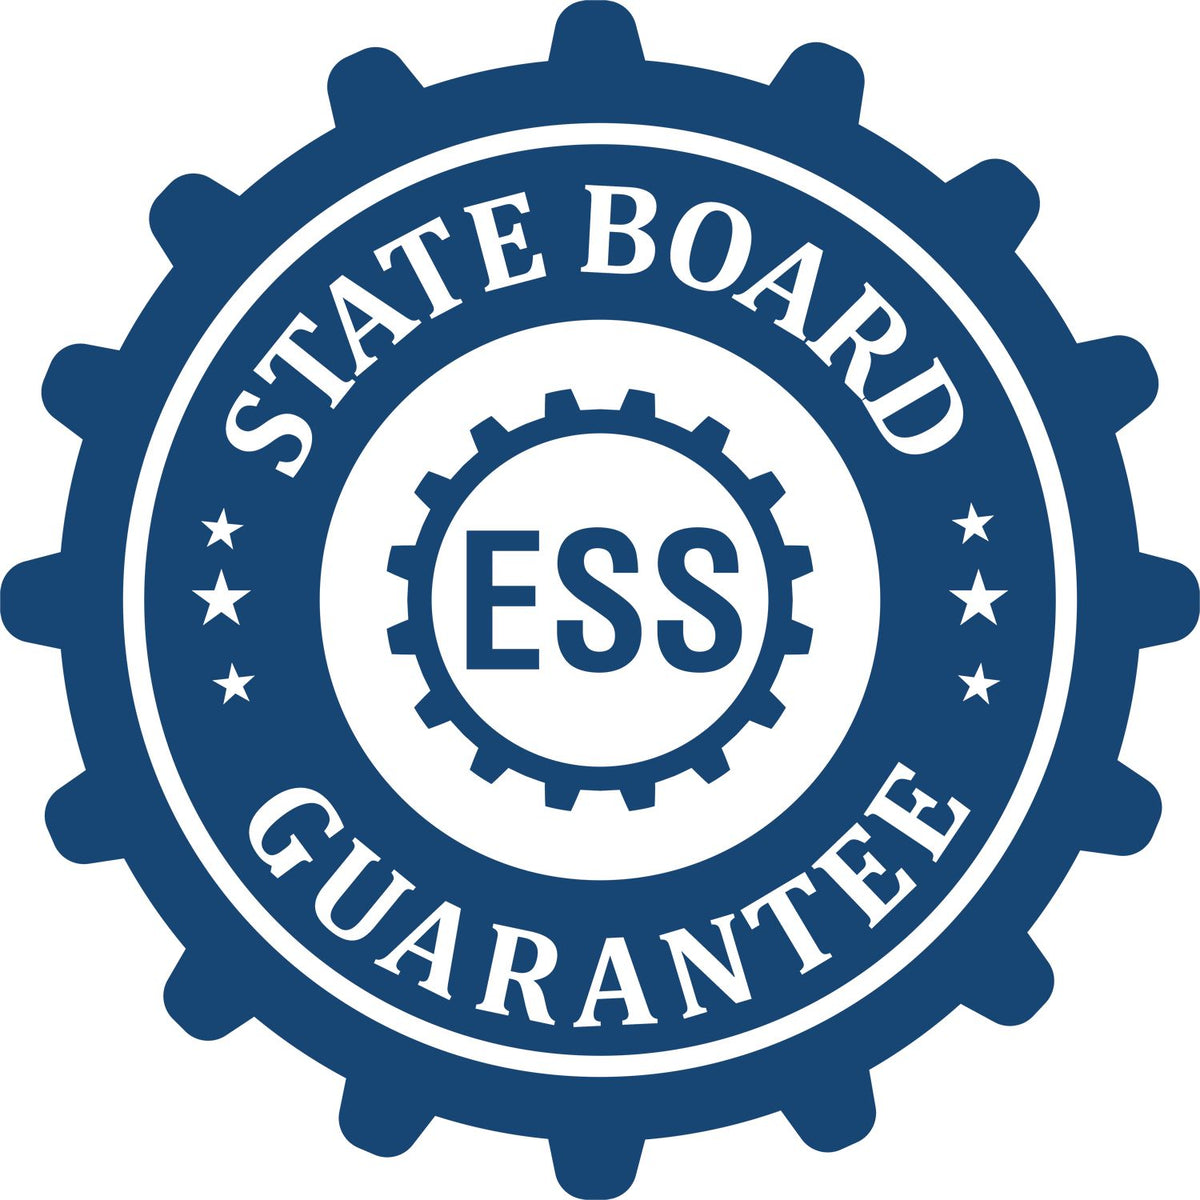 An emblem in a gear shape illustrating a state board guarantee for the Hybrid Montana Land Surveyor Seal